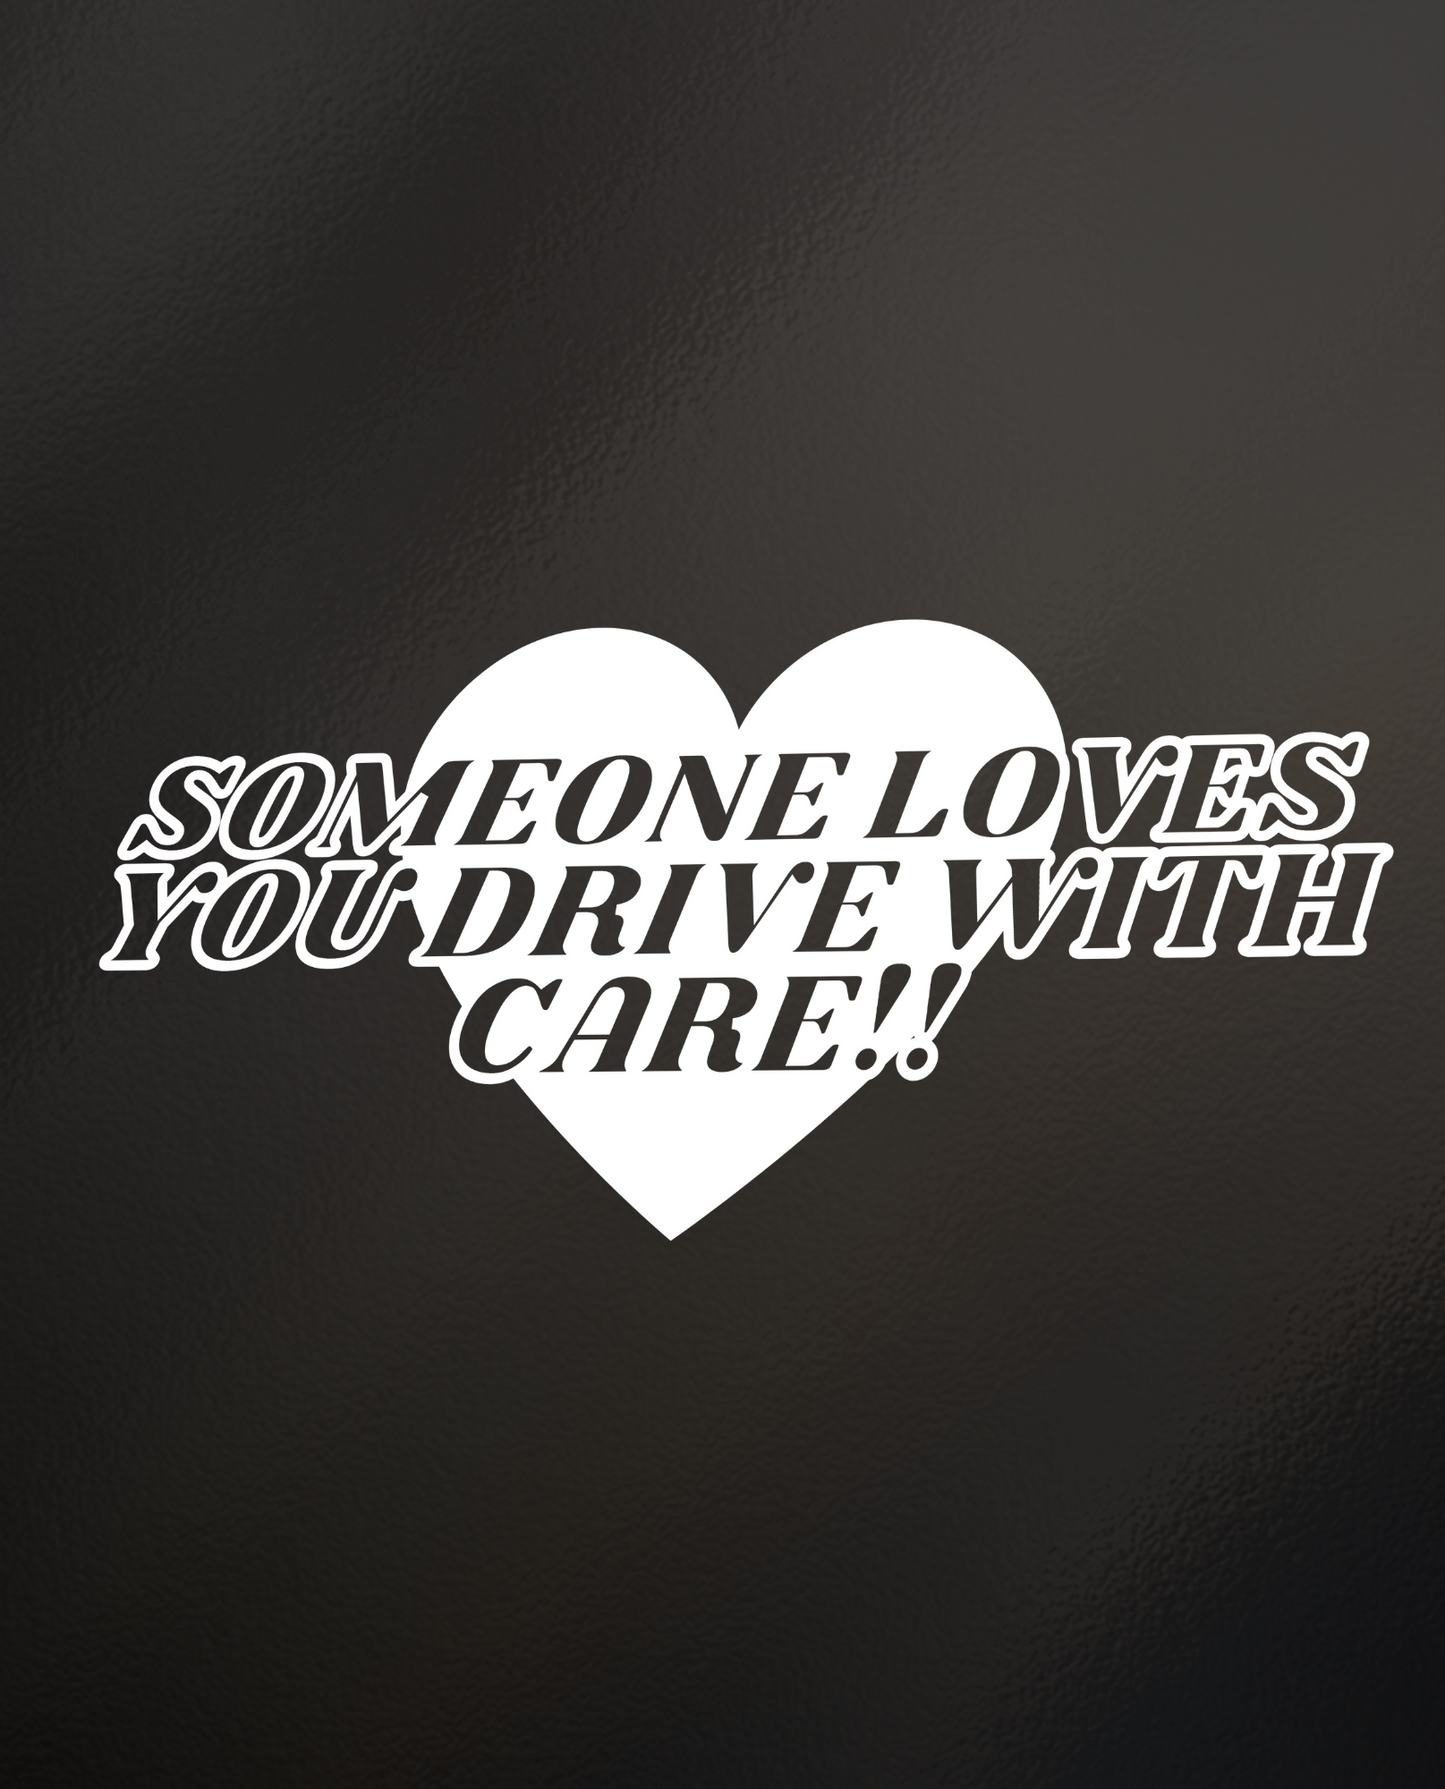 Someone Loves You Drive With Care! - Vinyl Sticker